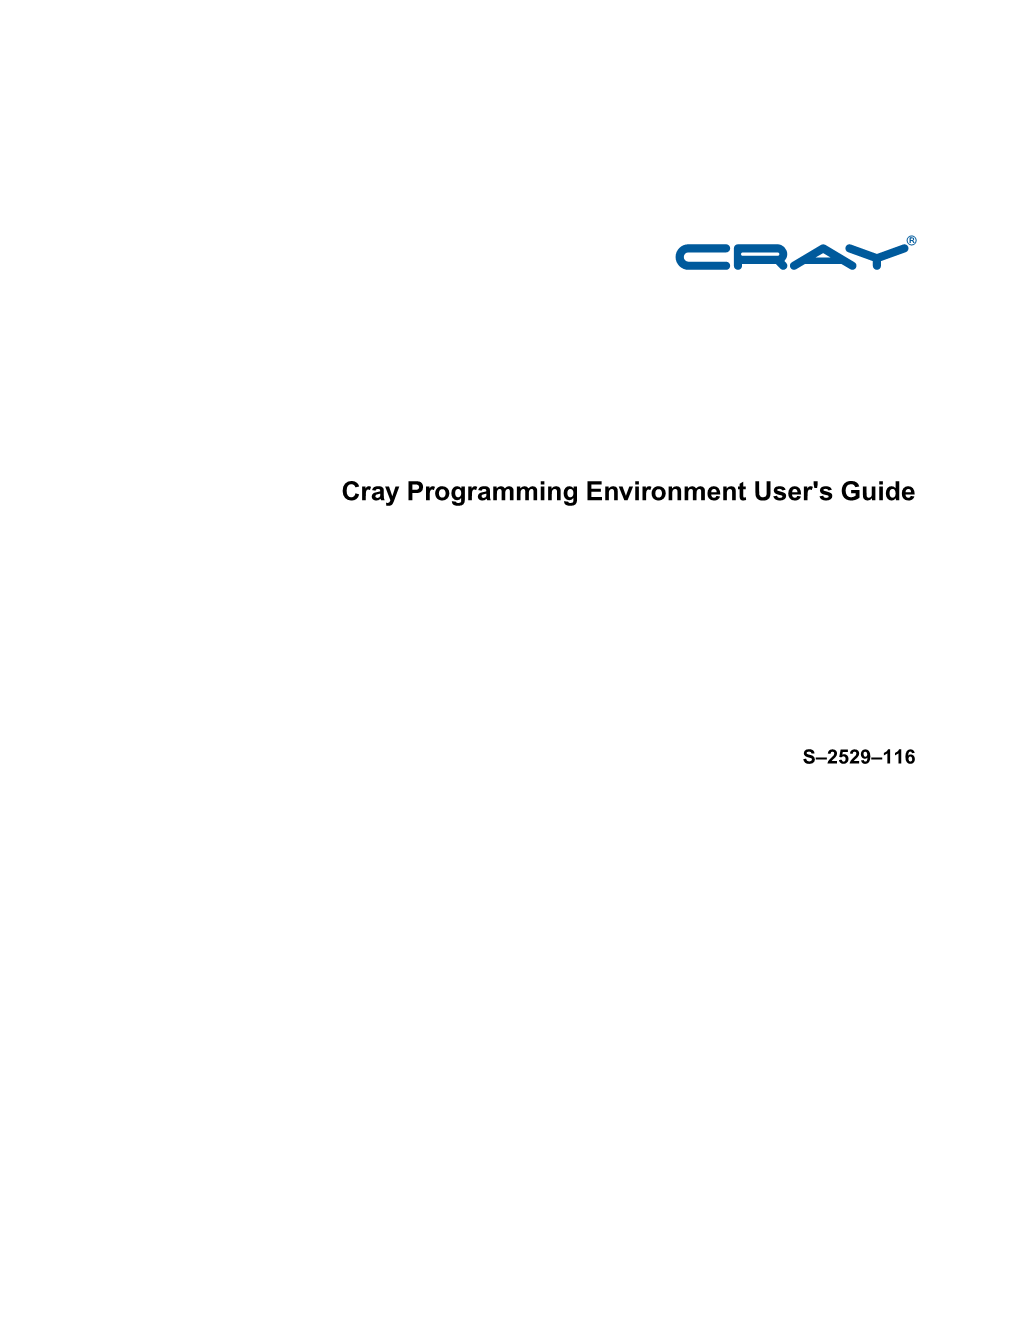 Cray Programming Environment User's Guide